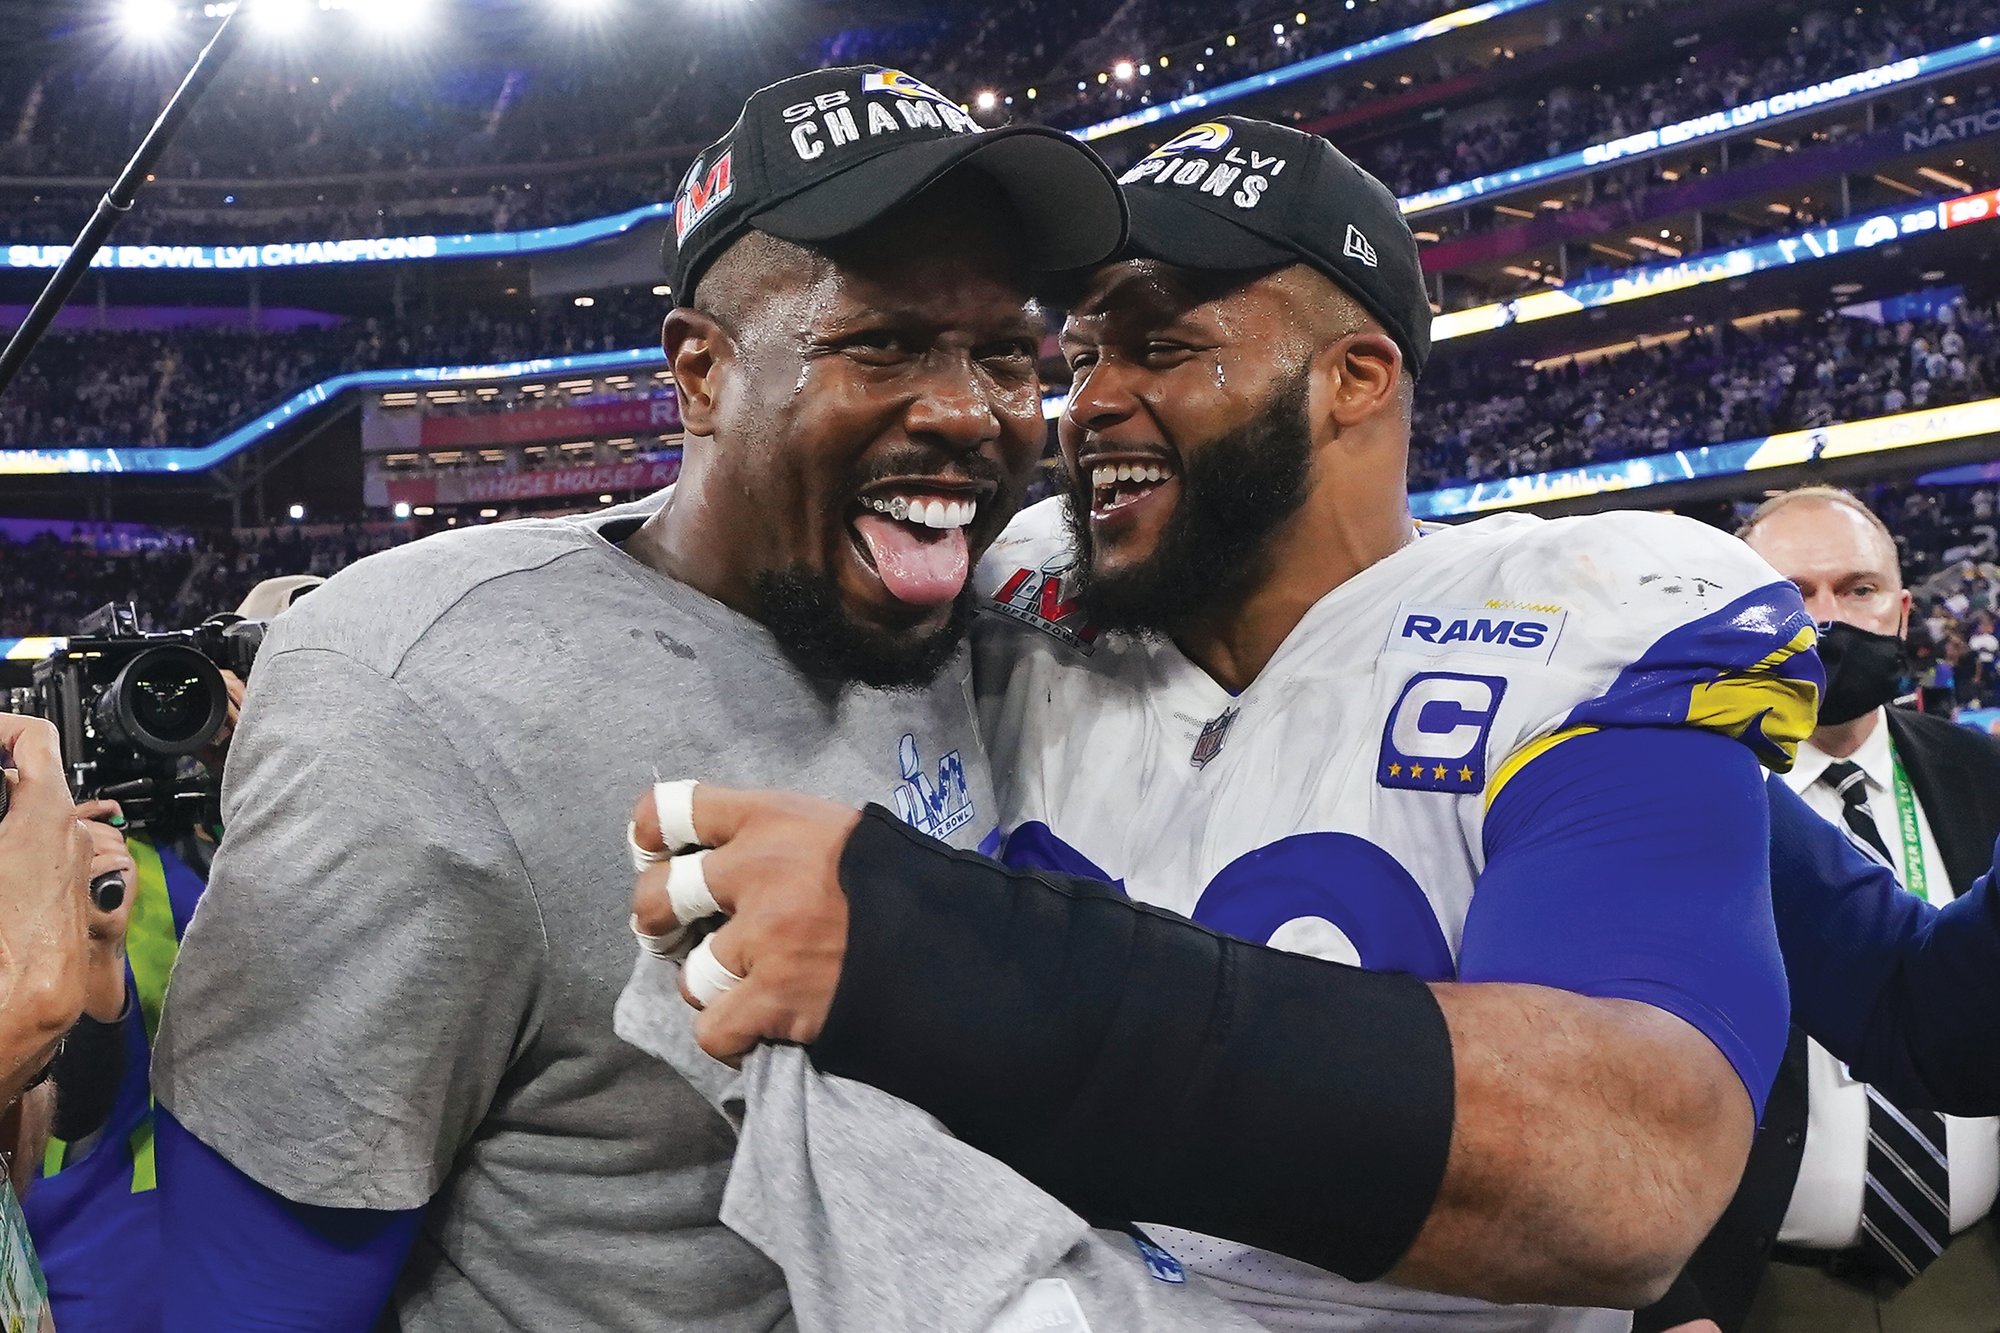 Built to win now, Rams deliver a Super Bowl title - The Sumter Item